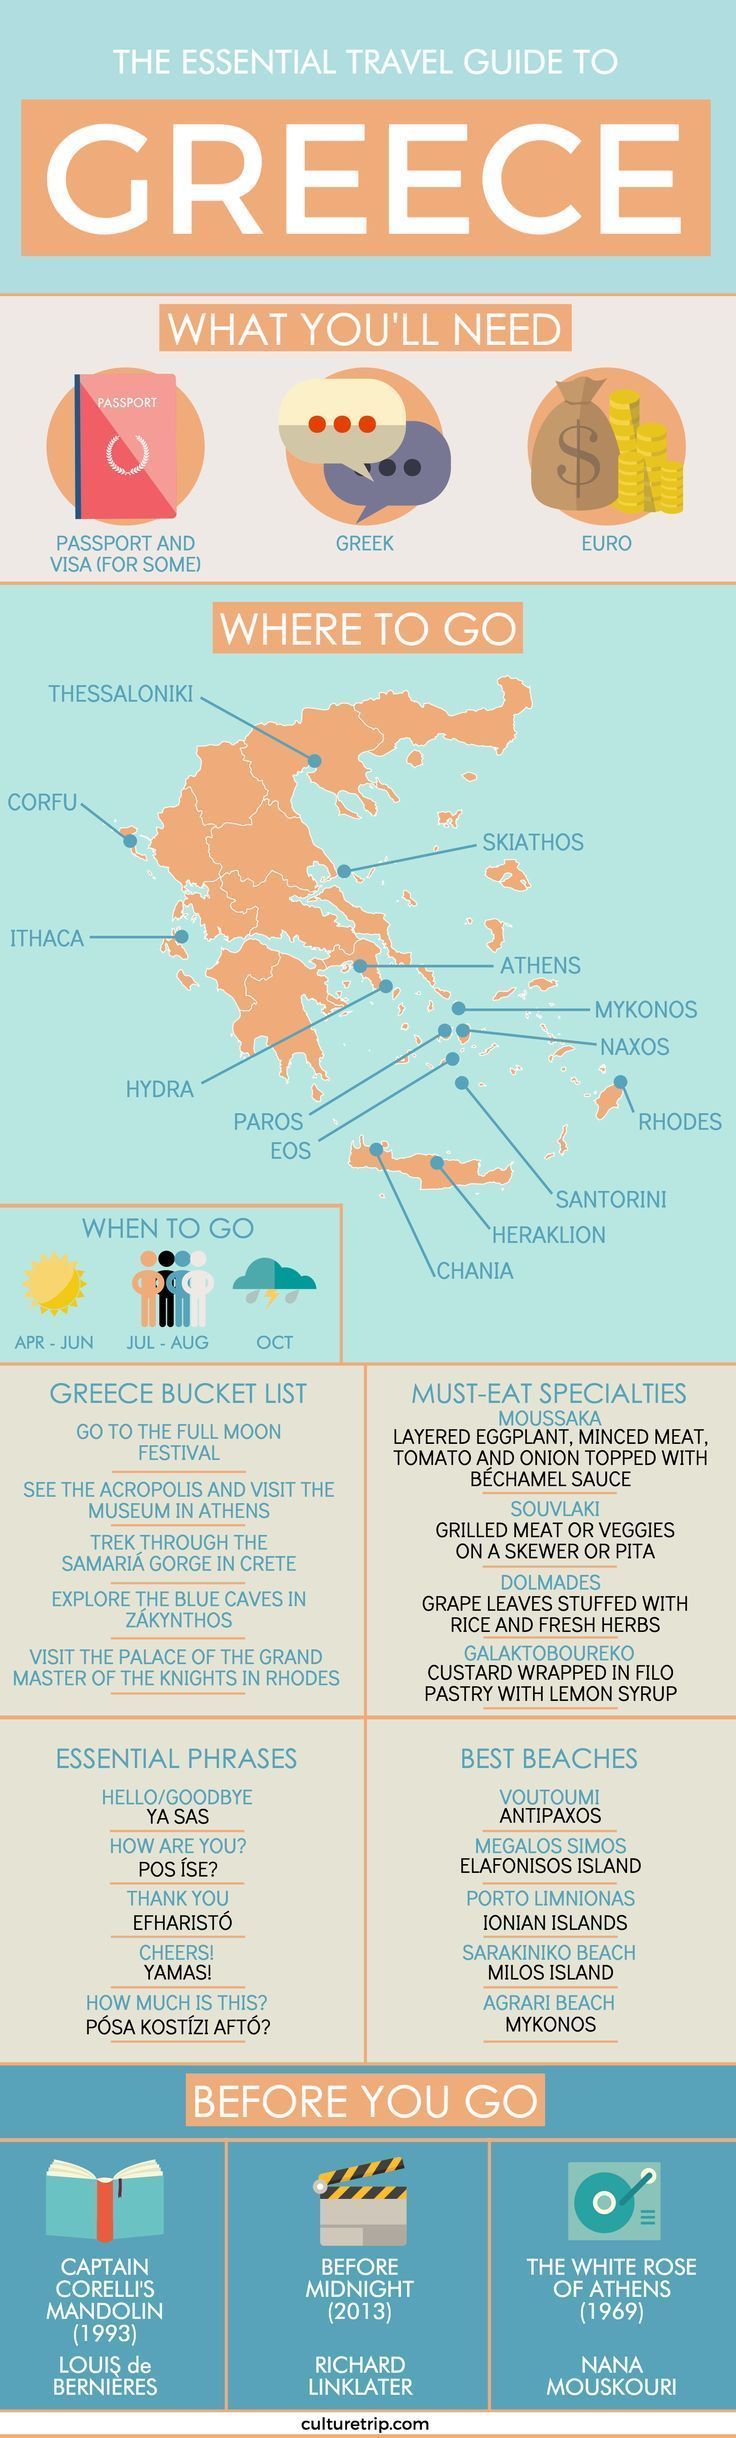 The Essential Travel Guide To Greece (Infographic)